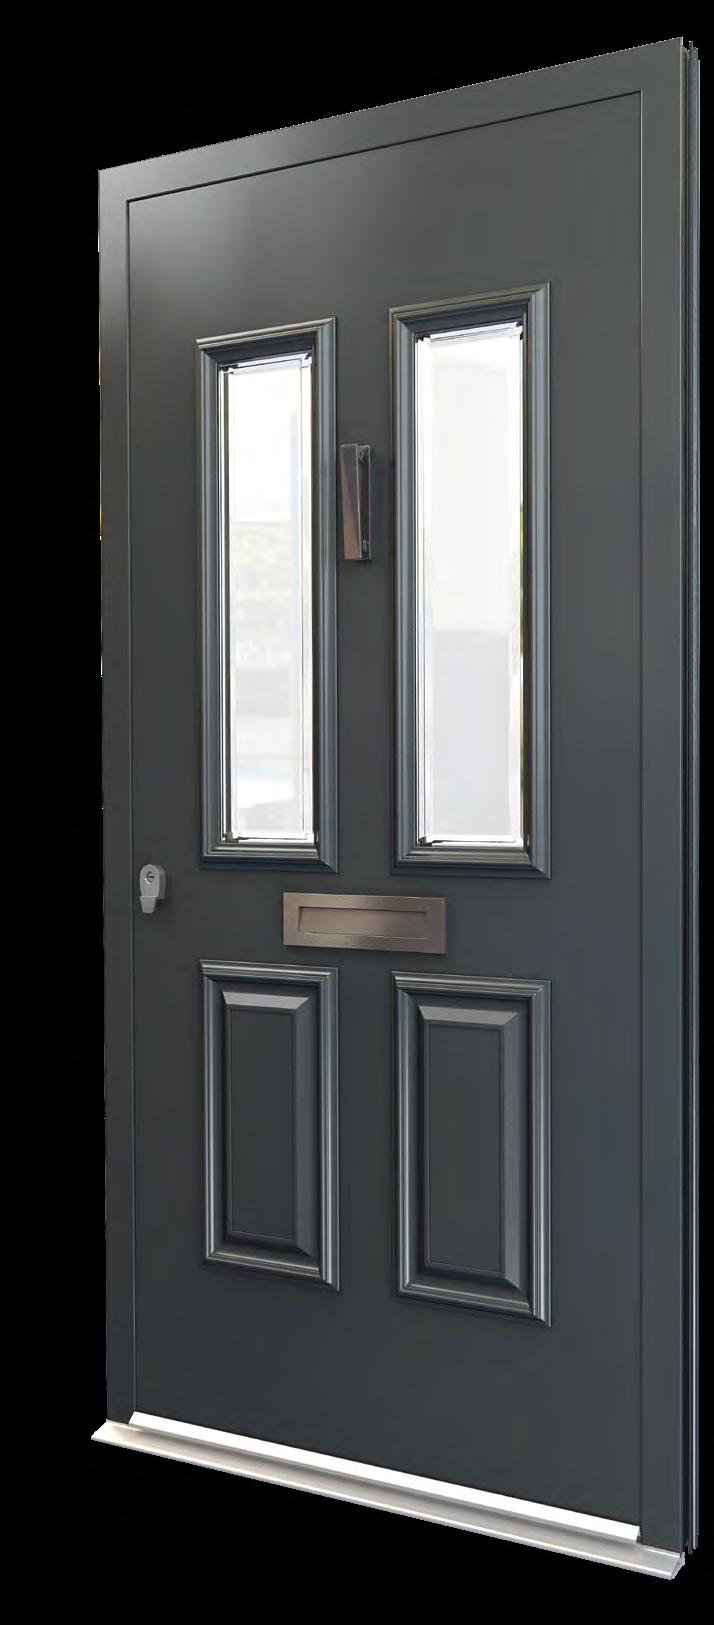 Our Traditional door range has been carefully designed to recreate the traditional elegance of